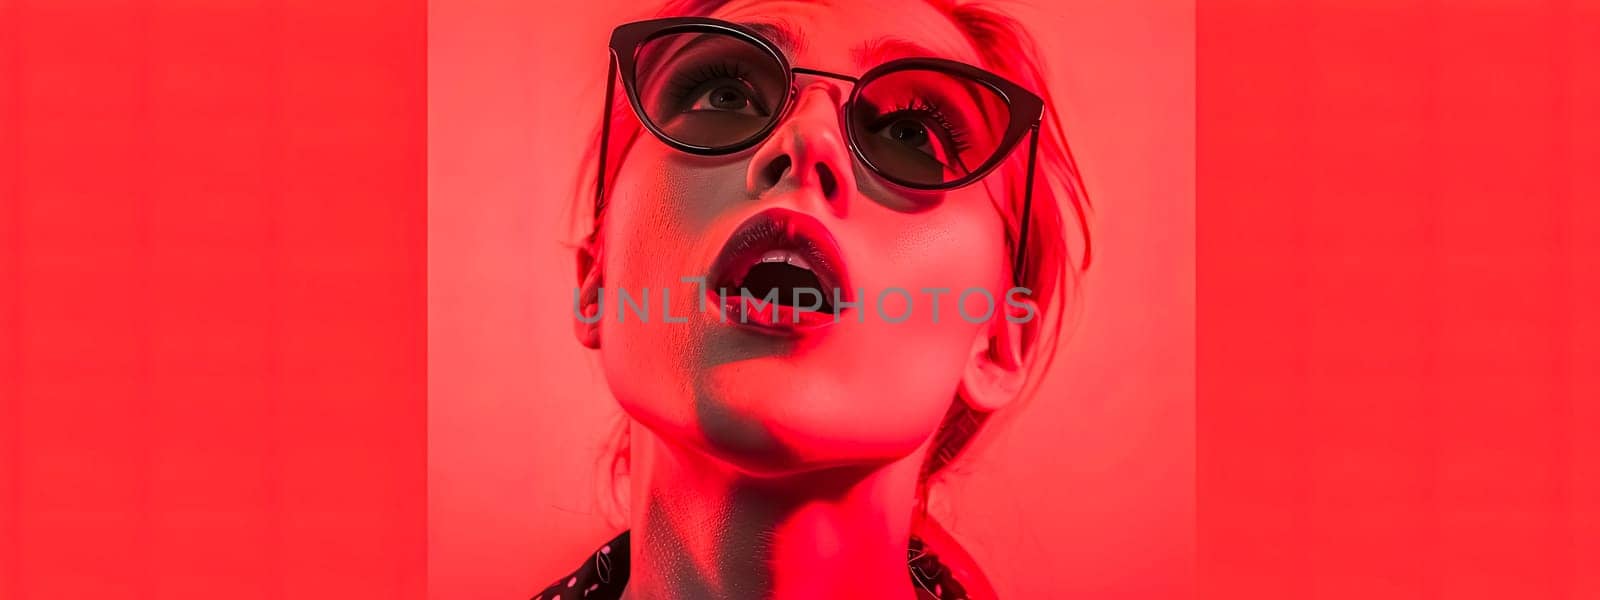 striking portrait of a person in a monochromatic red color scheme, giving it an "infra-red" photography effect.